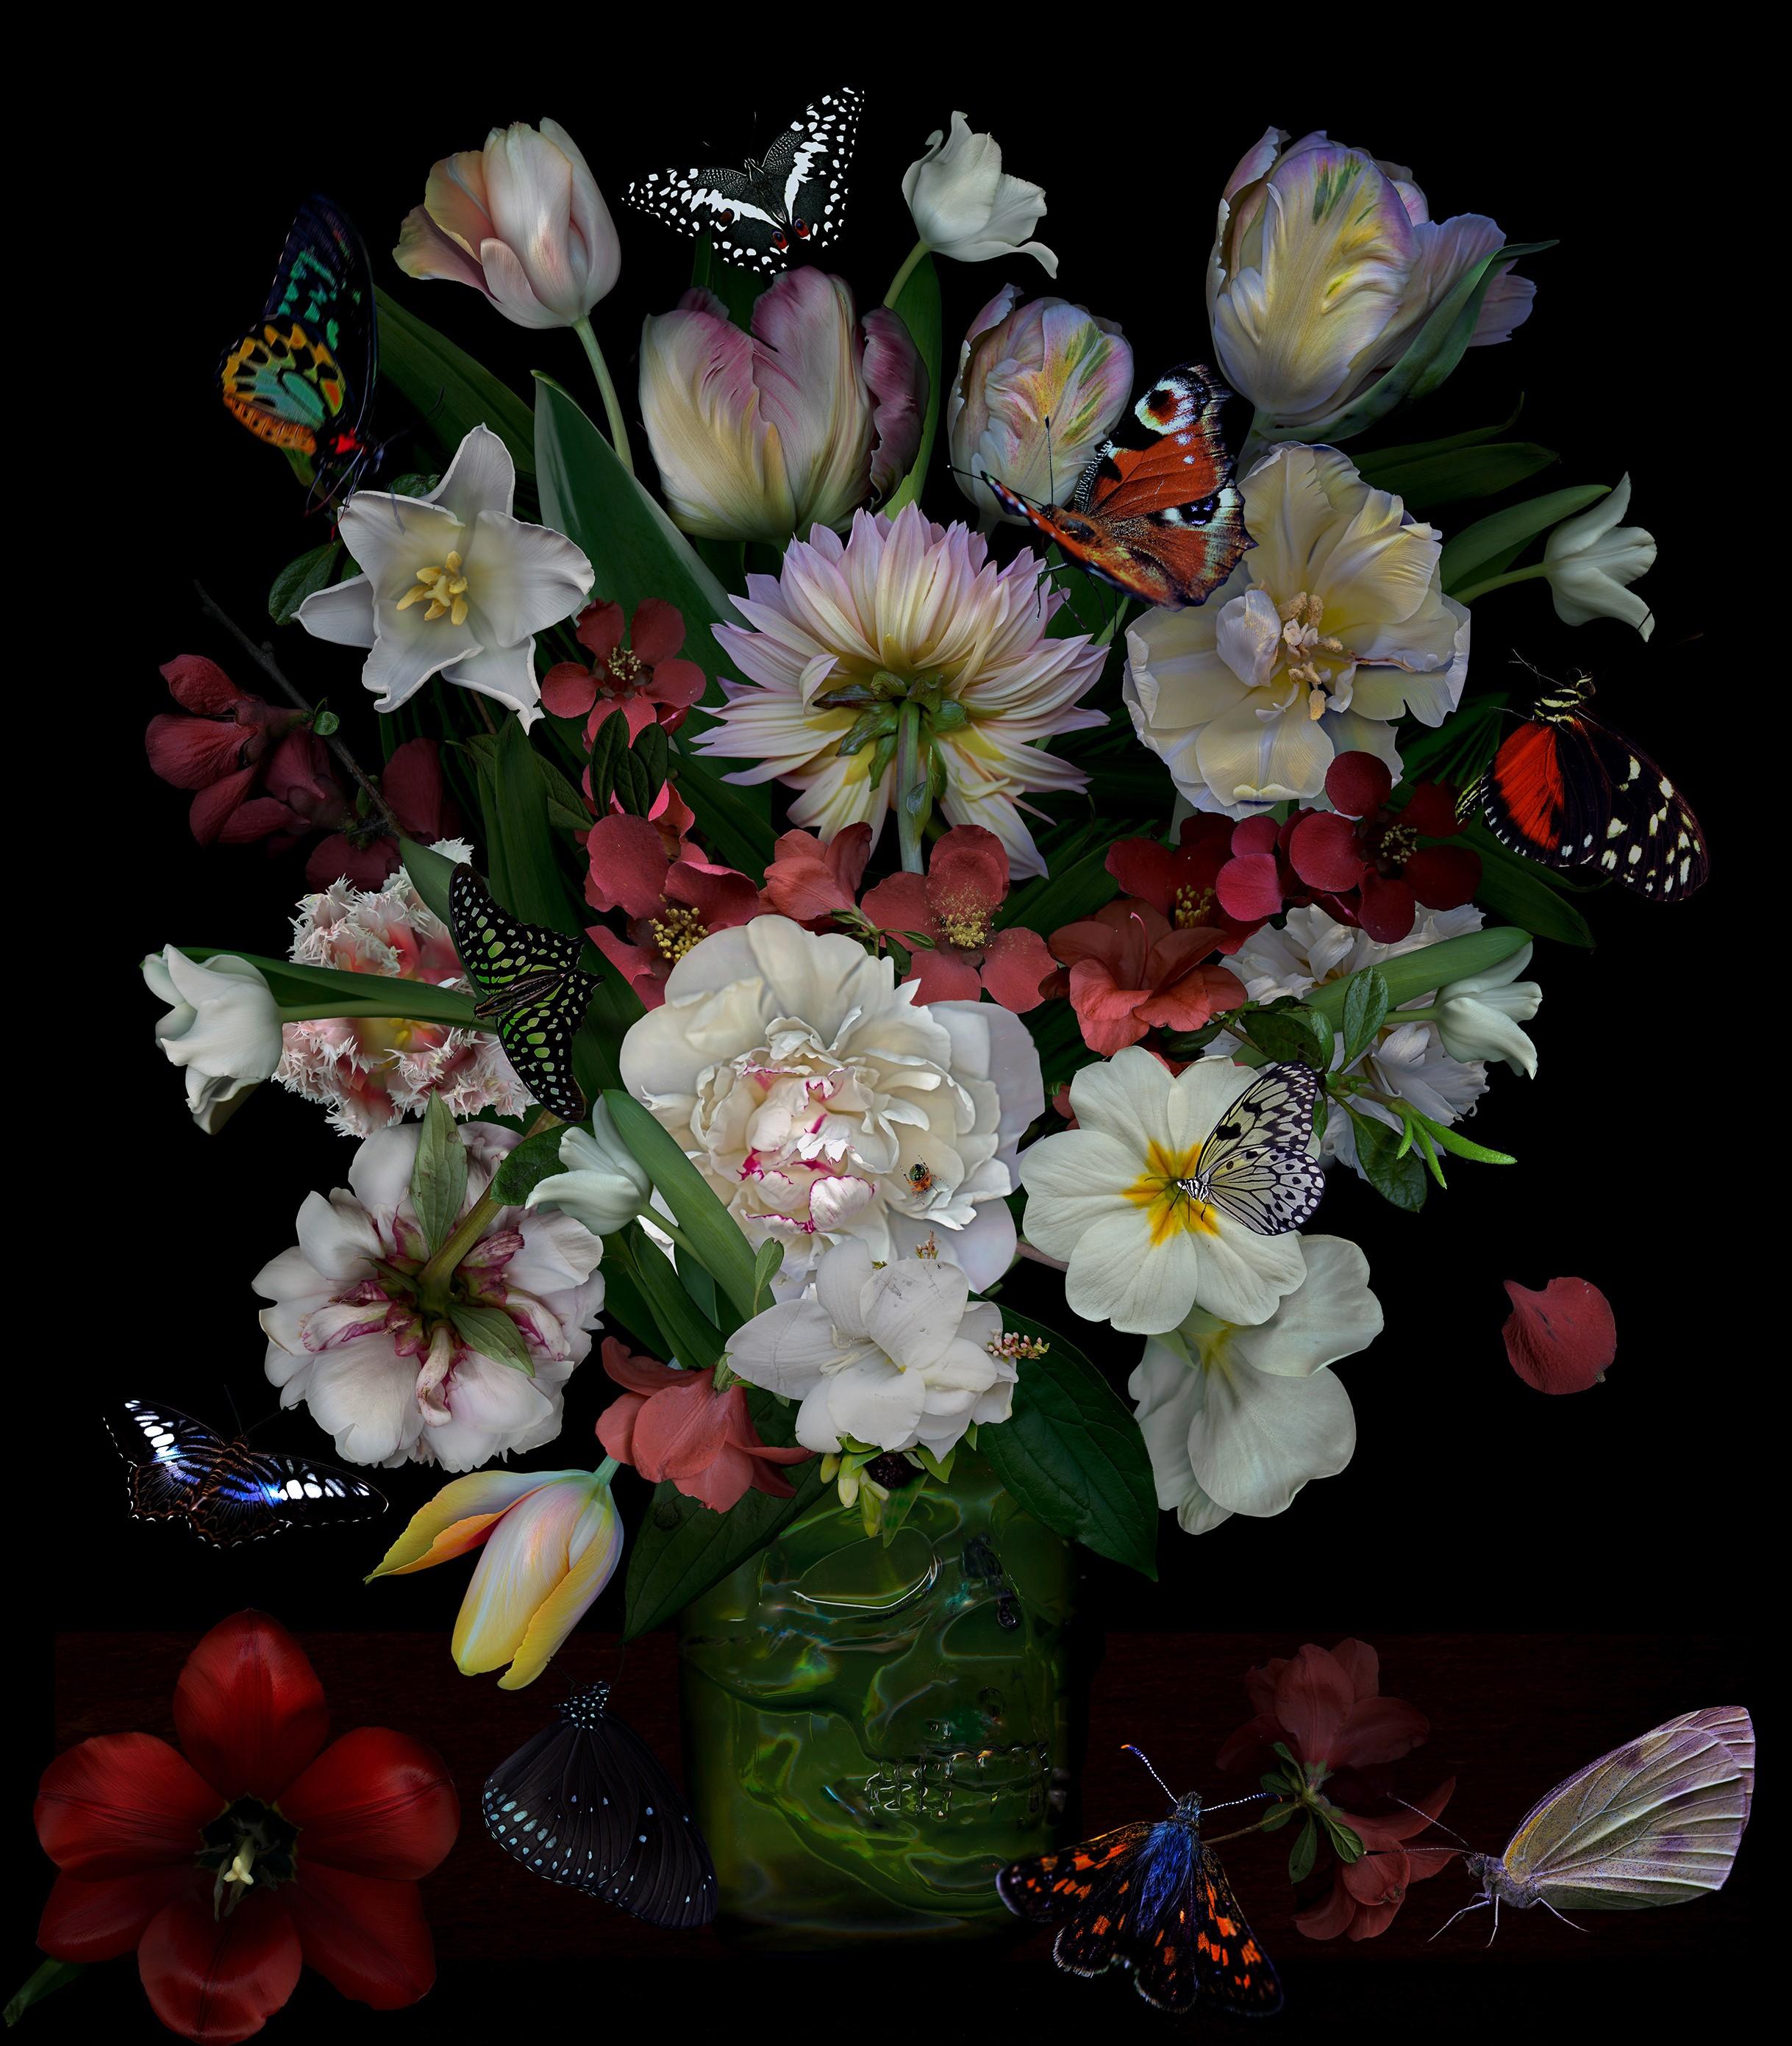 Zoltan Gerliczki Still-Life Photograph - Still Life with a Green Skull. Flowers. Digital Collage Color Photograph